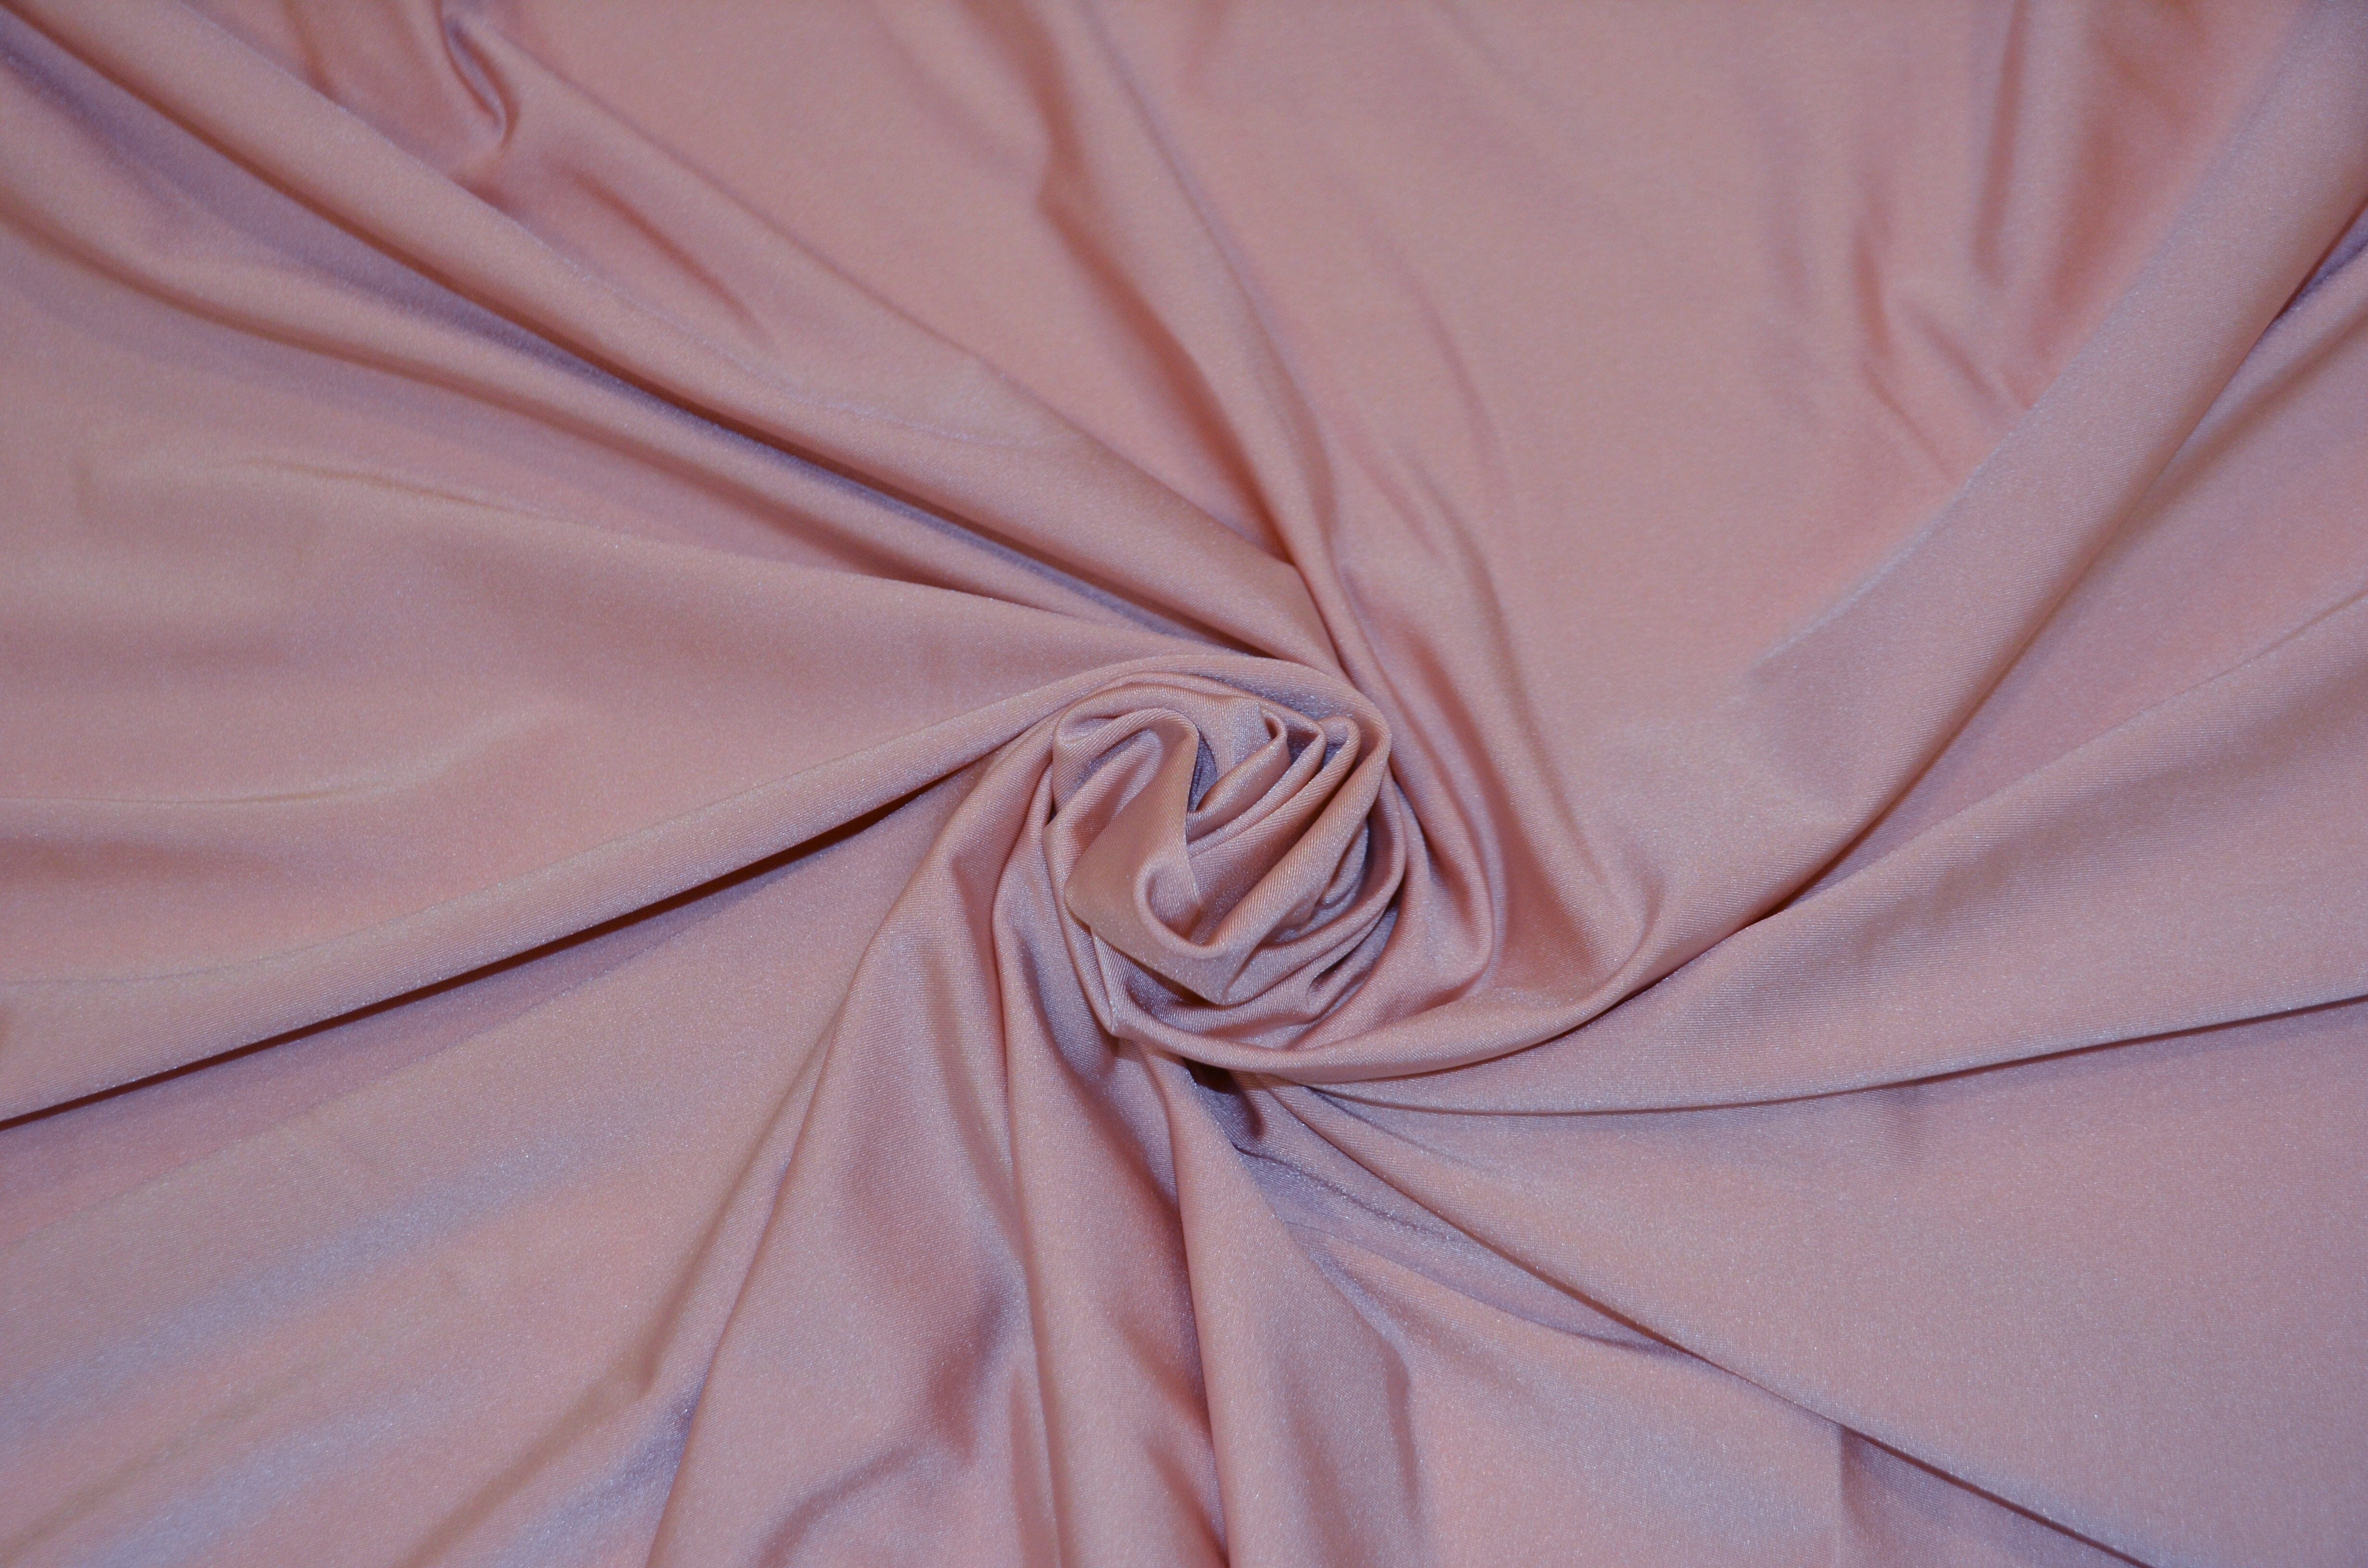 Nylon Spandex 4 Way Stretch Fabric | 60" Width | Great for Swimwear, Dancewear, Waterproof, Tablecloths, Chair Covers | Multiple Colors | Fabric mytextilefabric Yards Mauve 